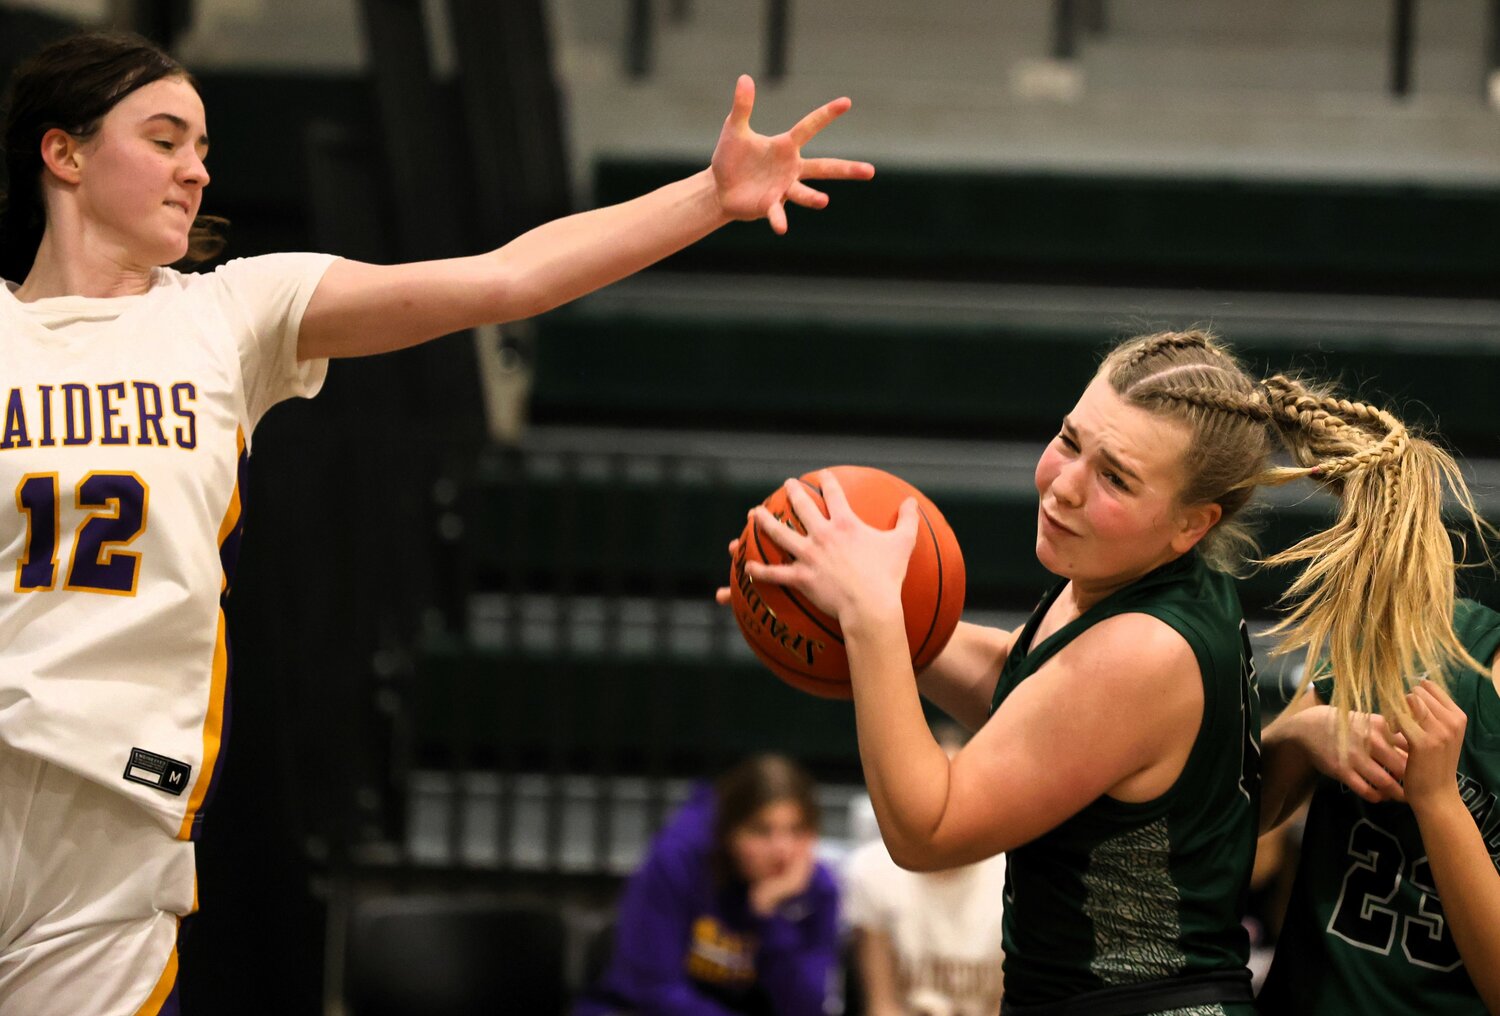 Park’s Olivia Czarnota pulls down a rebound early in the second half.